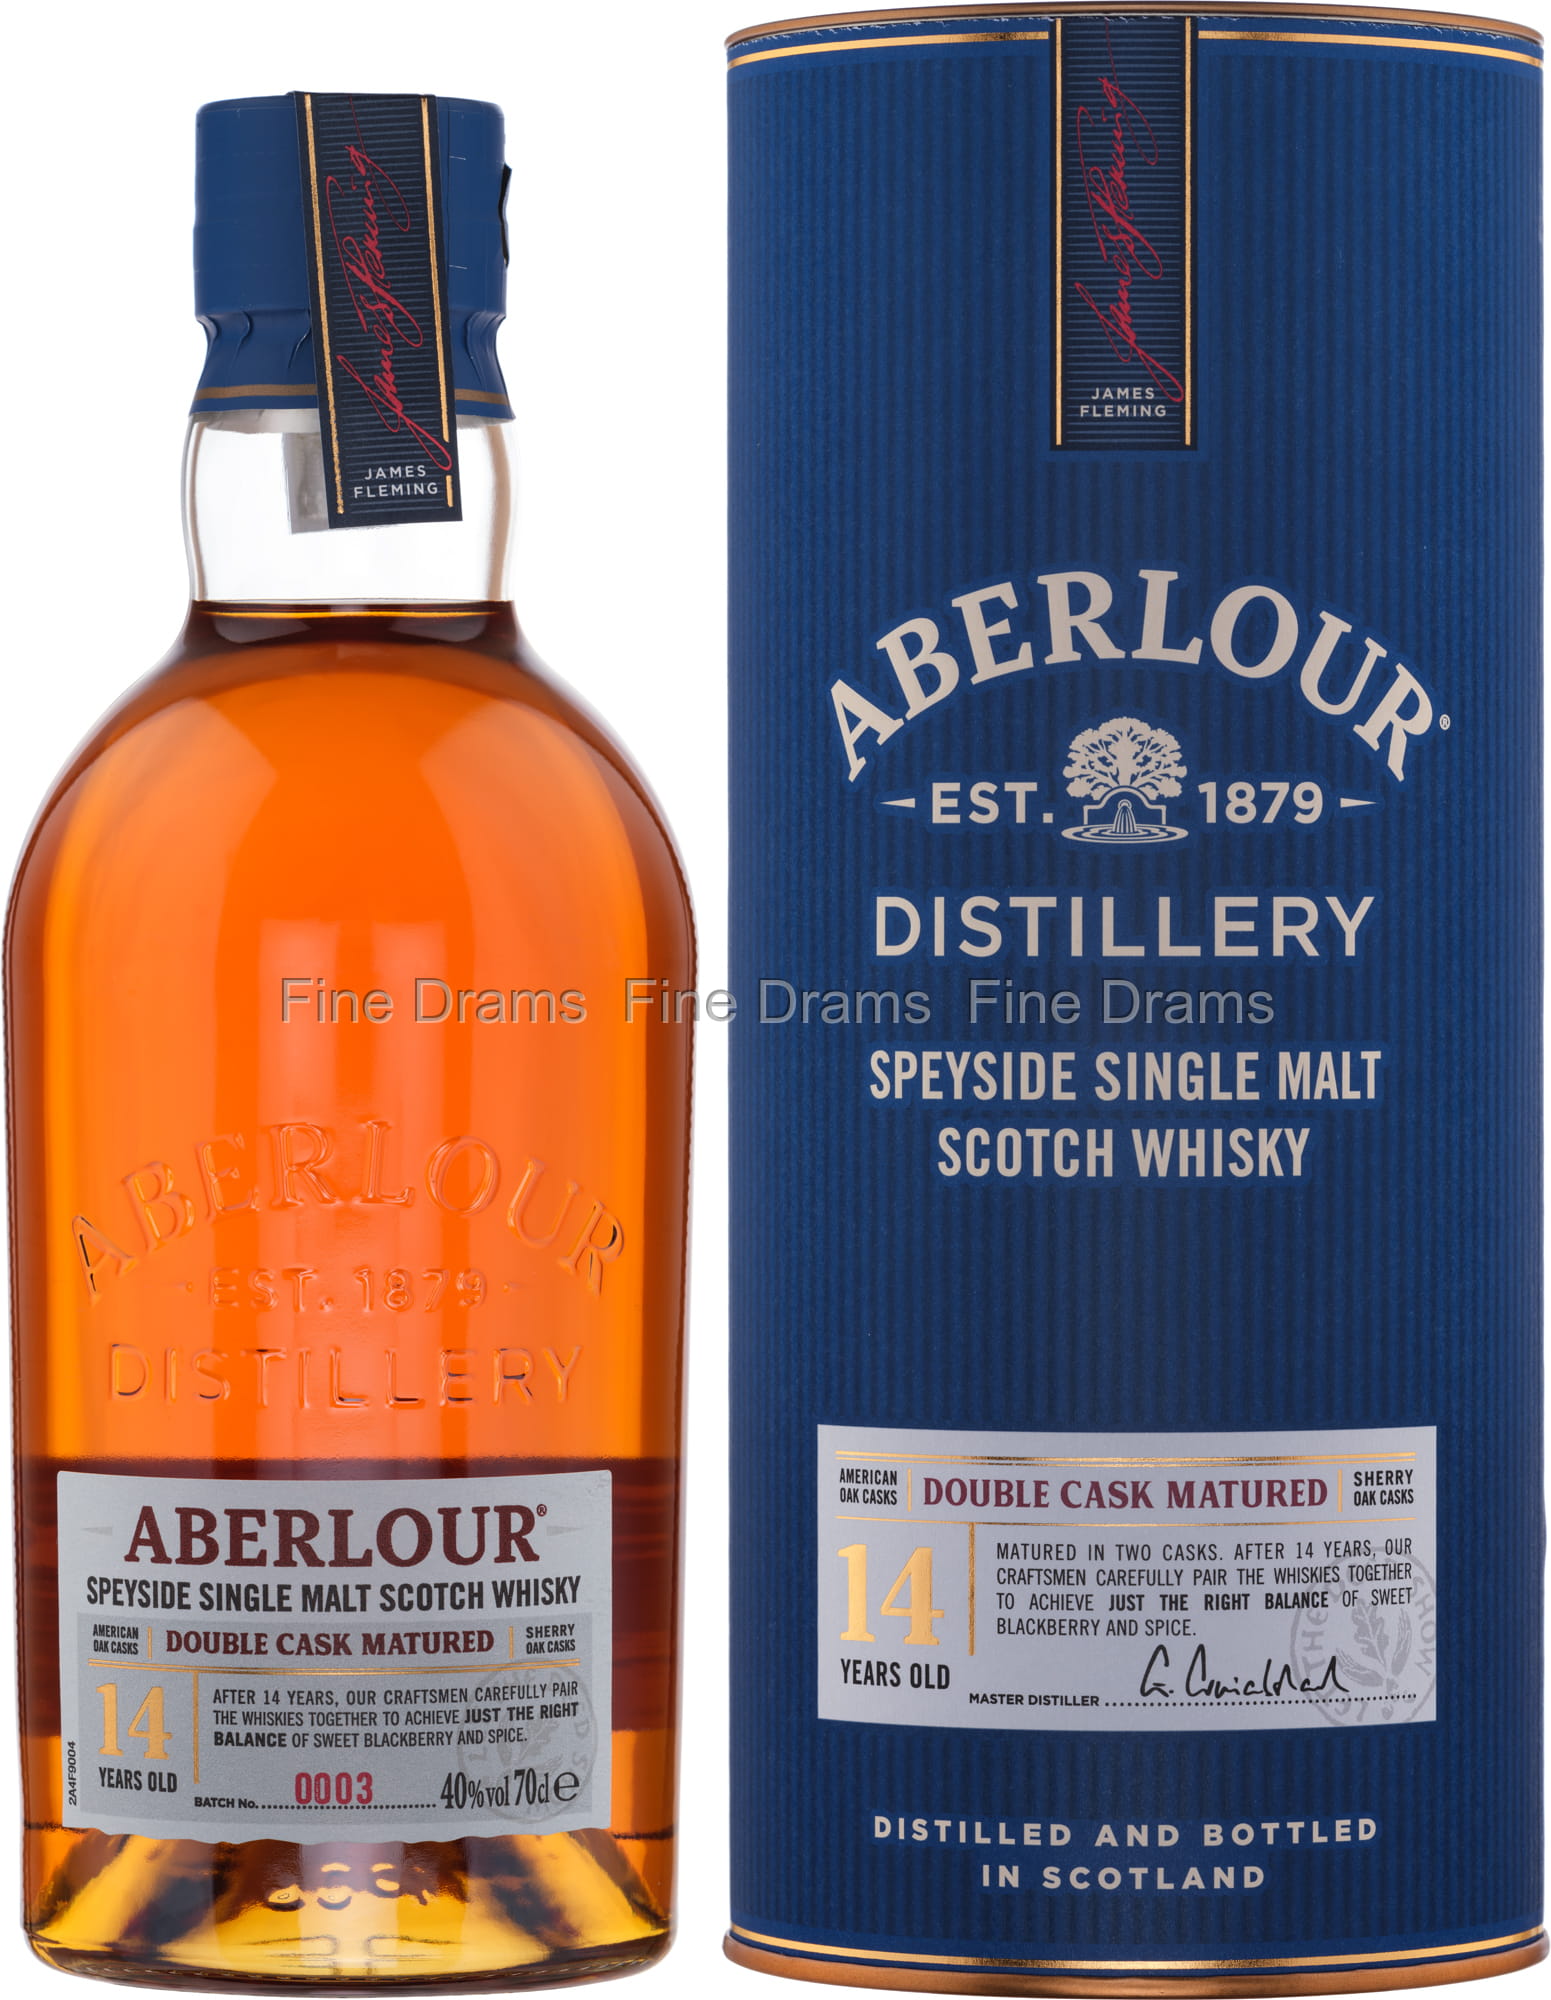 New Arrival of the Week: Aberlour 14 Year Old Double Cask